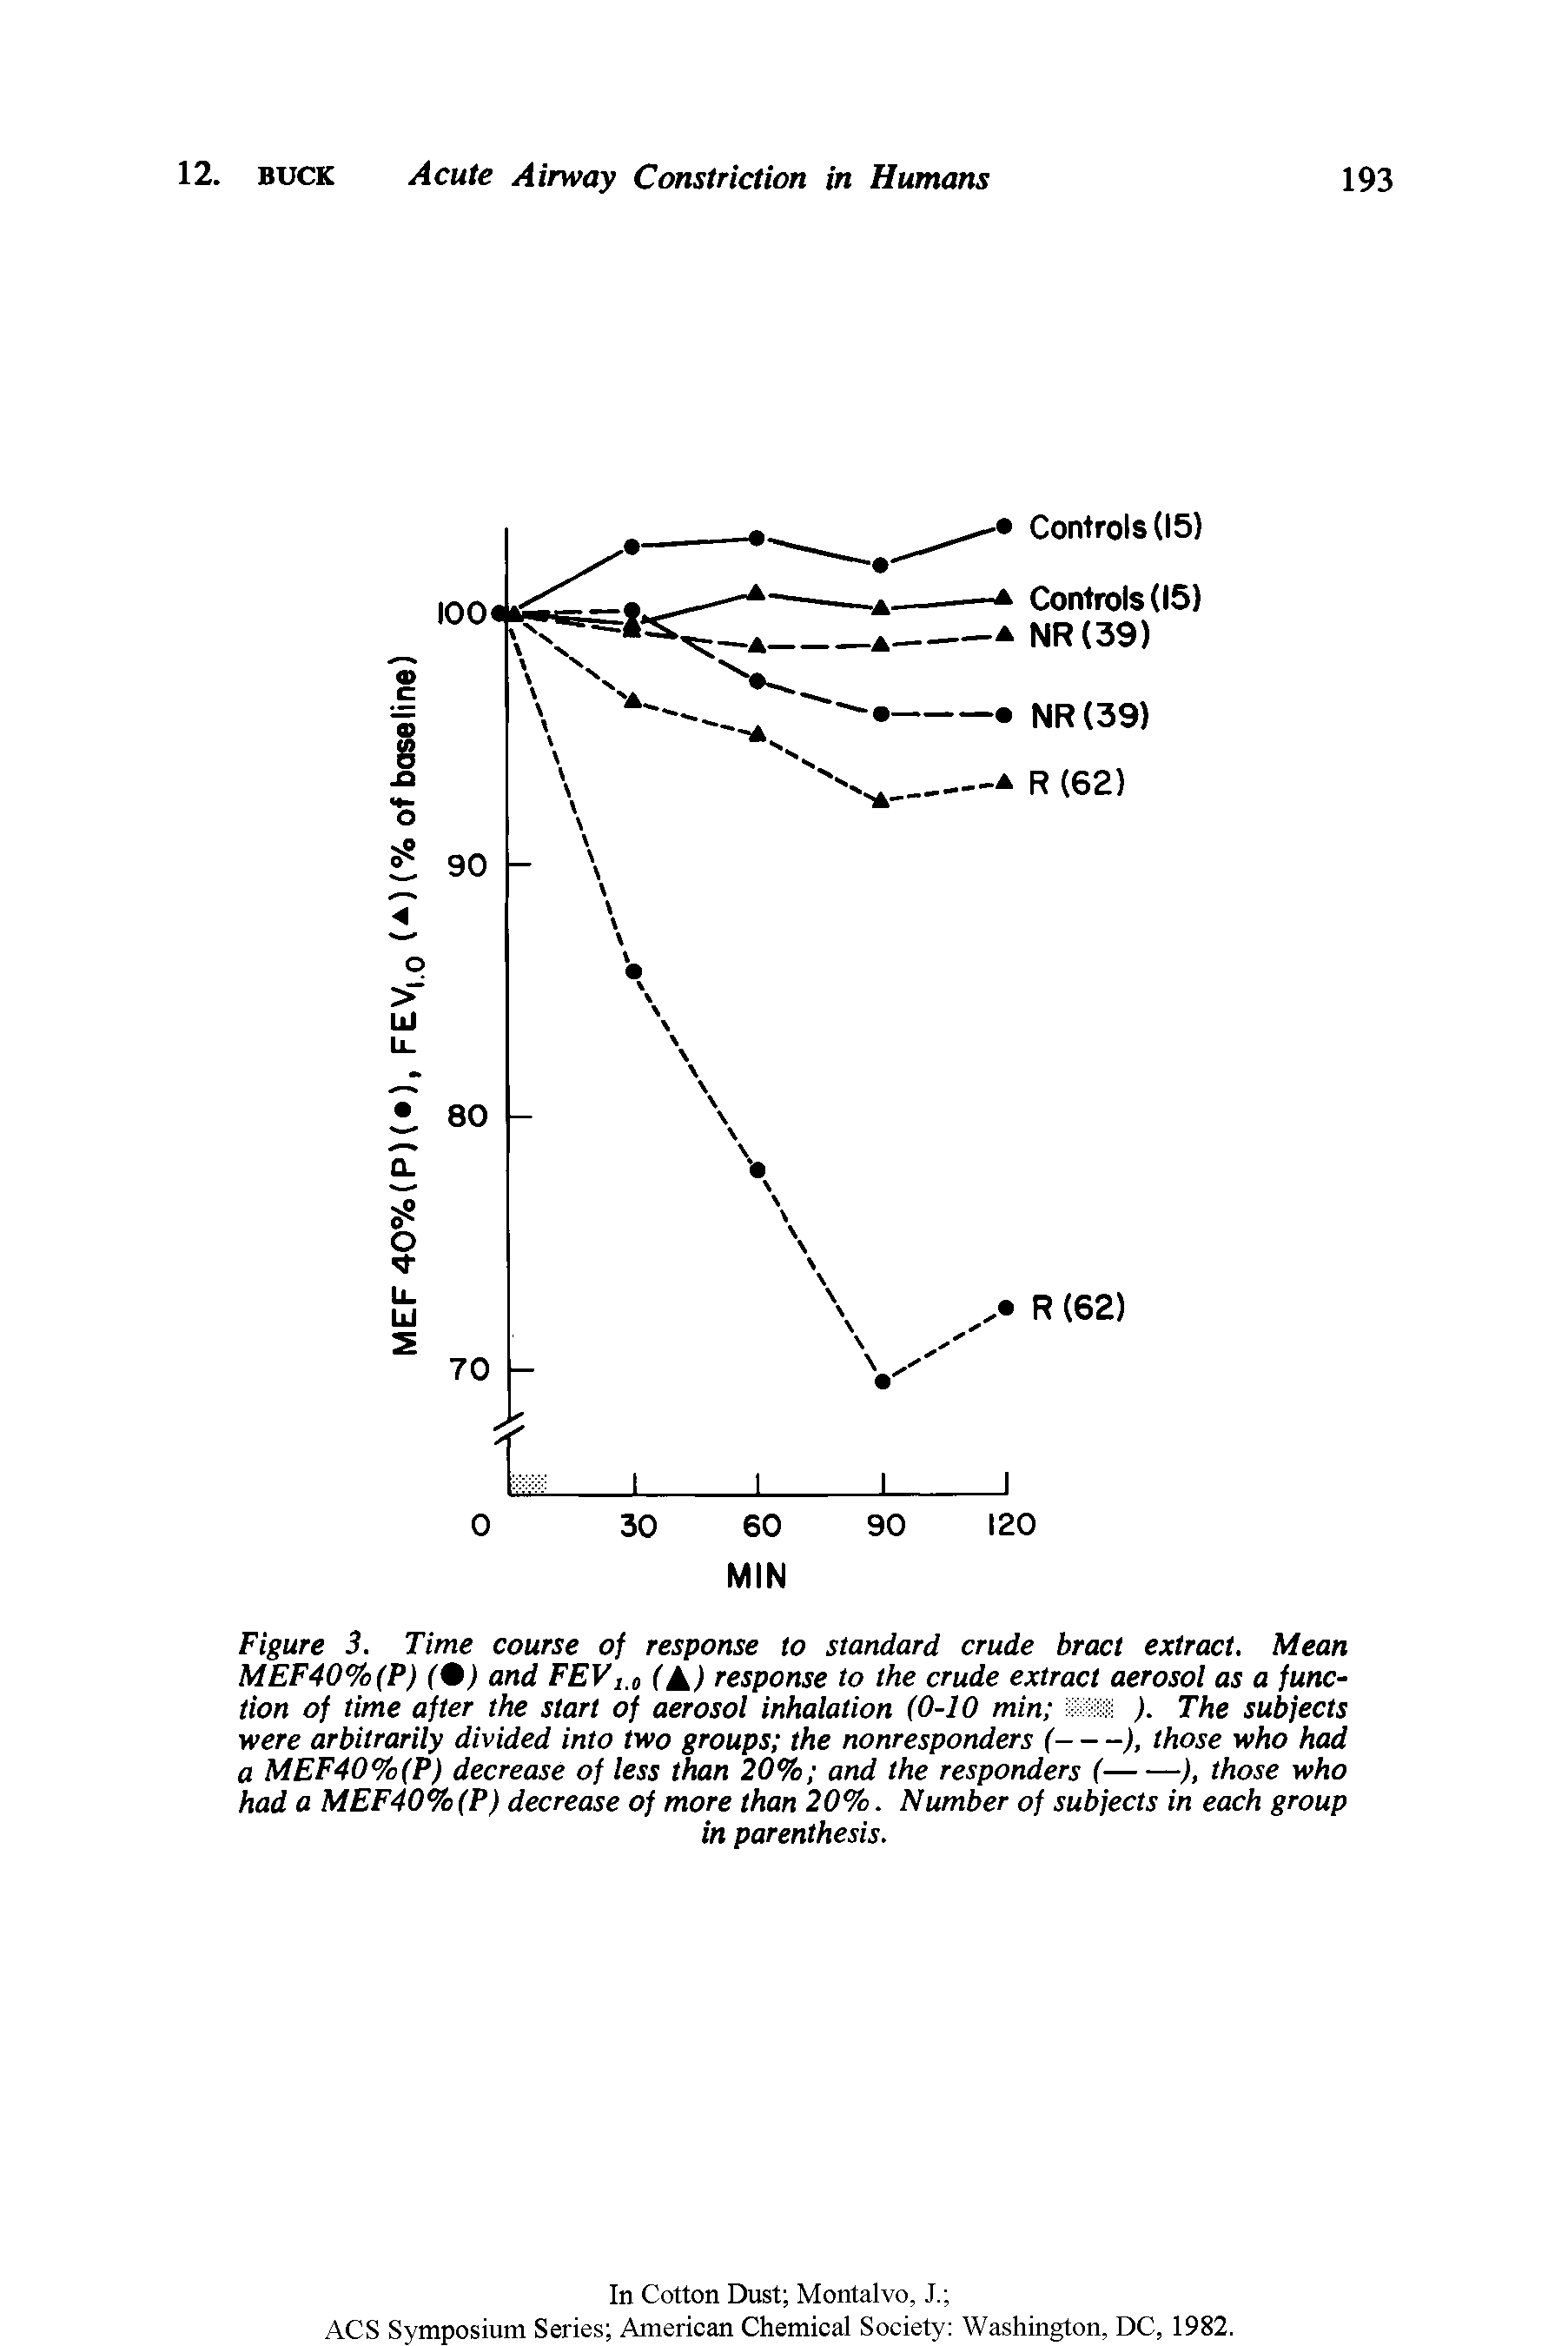 Figure 3. Time course of response to standard crude bract extract. Mean MEF40%(P) (0) and FEVi,o CAl response to the crude extract aerosol as a function of time after the start of aerosol inhalation (0-10 min ). The subjects...